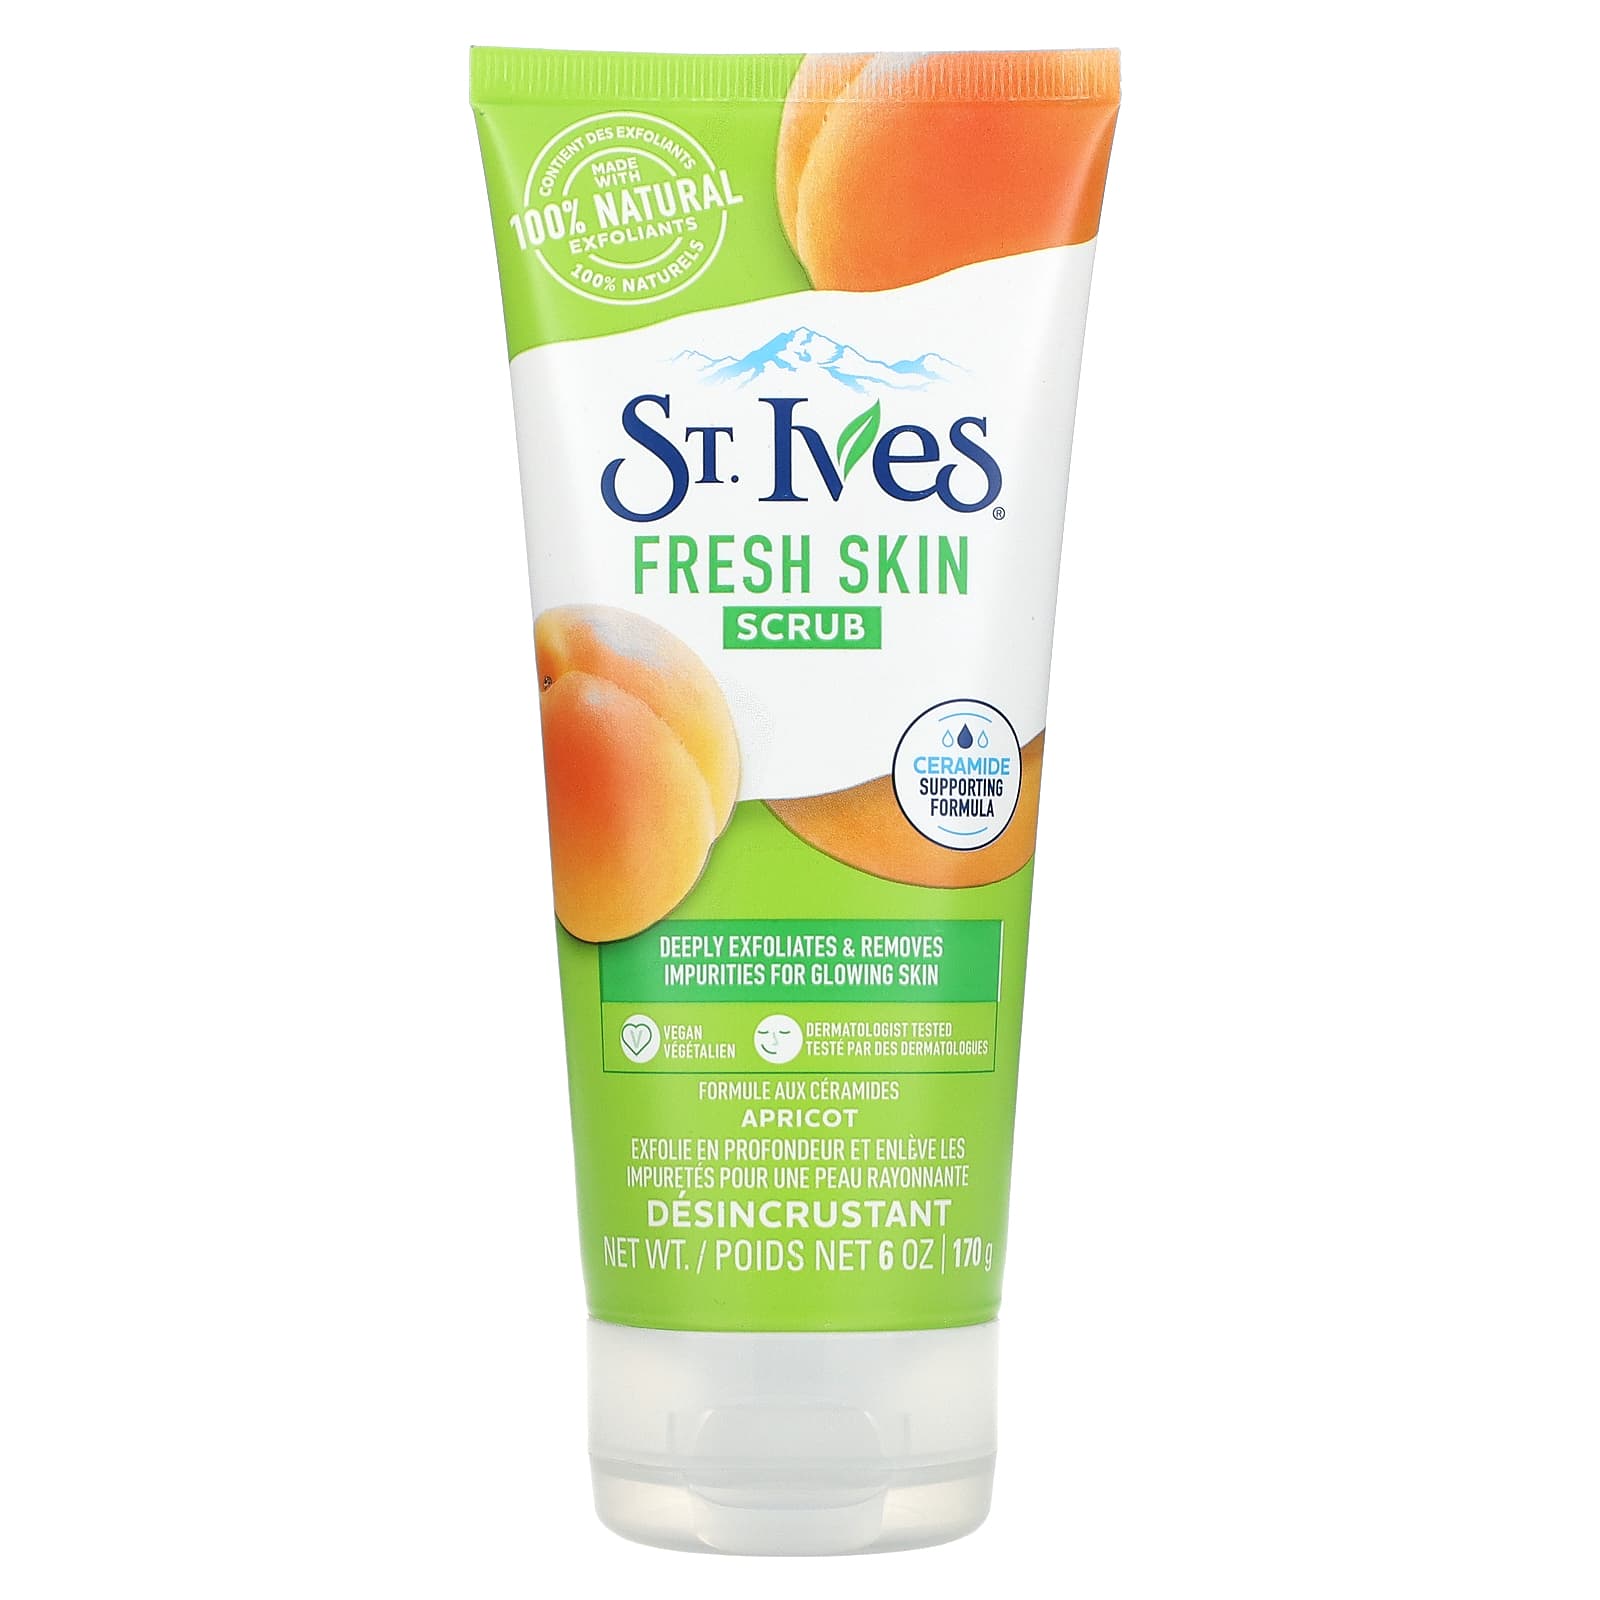 St. Ives, St. Ives, Fresh Skin Scrub, Apricot, BEST FACE SCRUBS IN INDIA FOR OILY SKIN